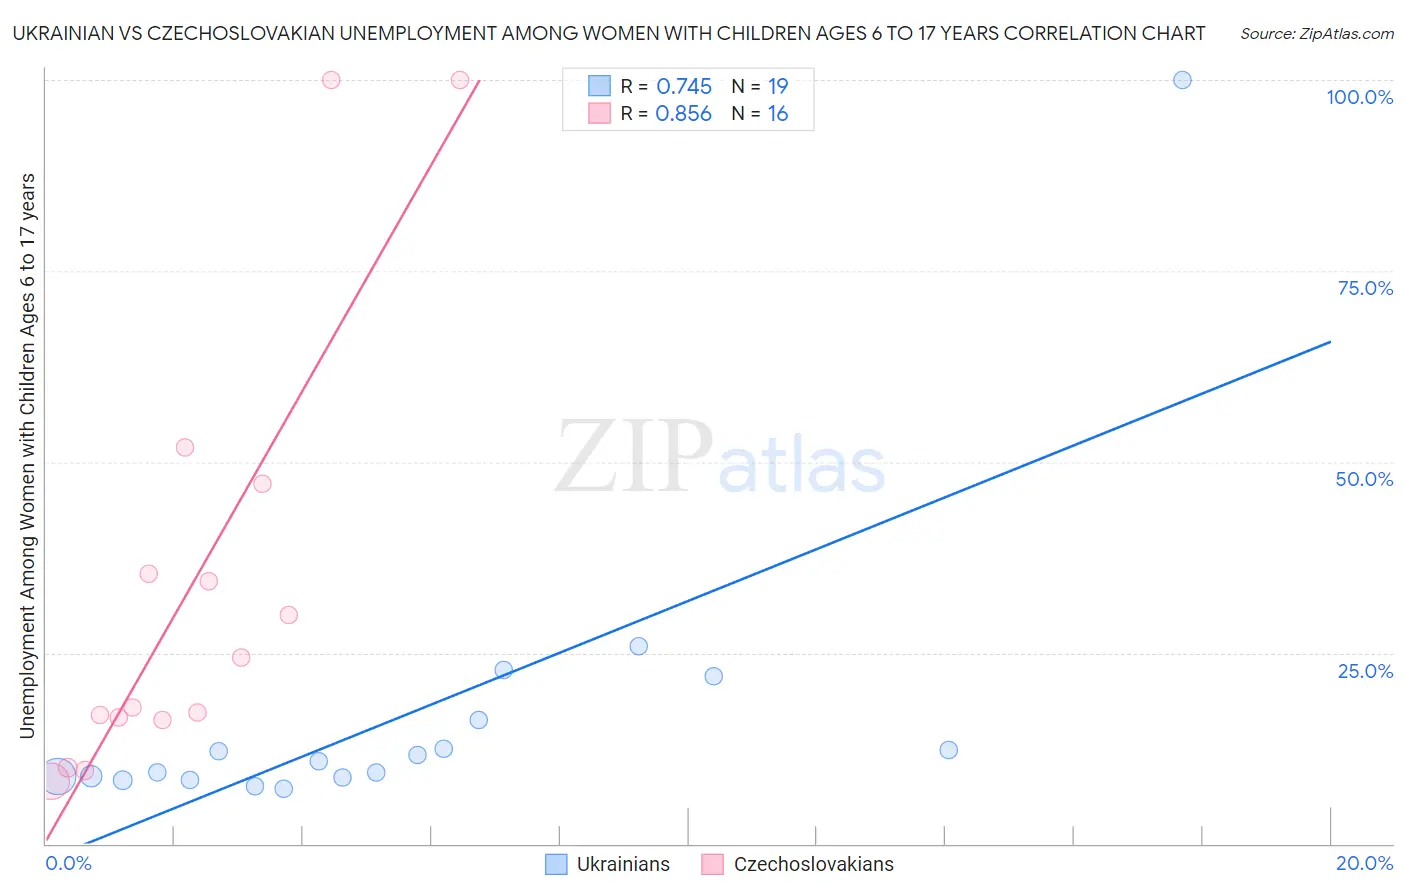 Ukrainian vs Czechoslovakian Unemployment Among Women with Children Ages 6 to 17 years